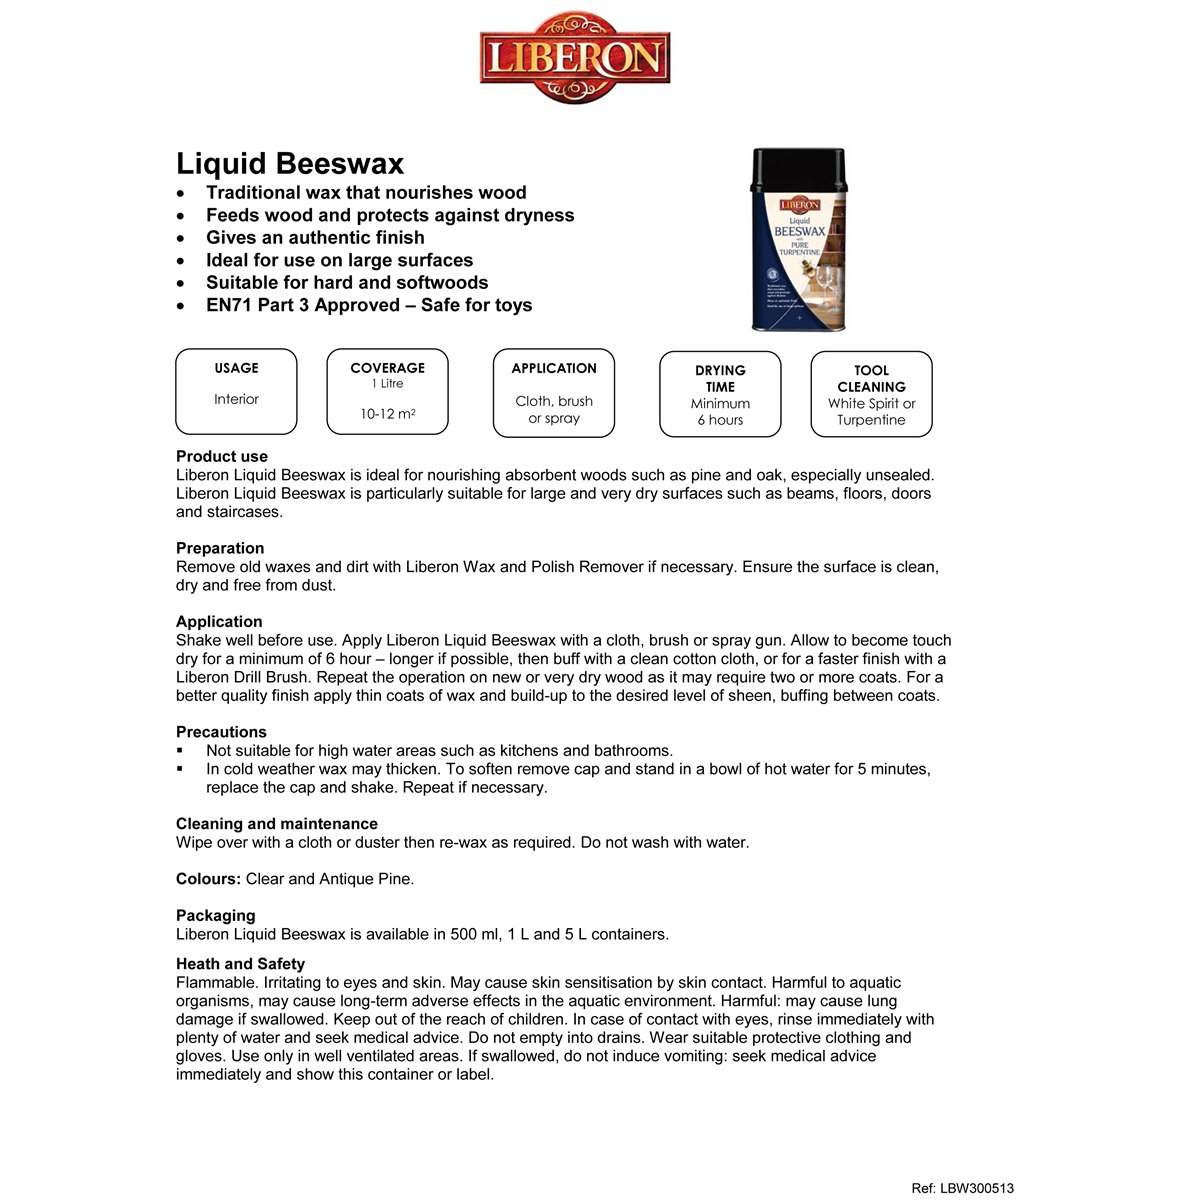 Liberon Liquid Beeswax with Pure Turpentine Usage Instructions